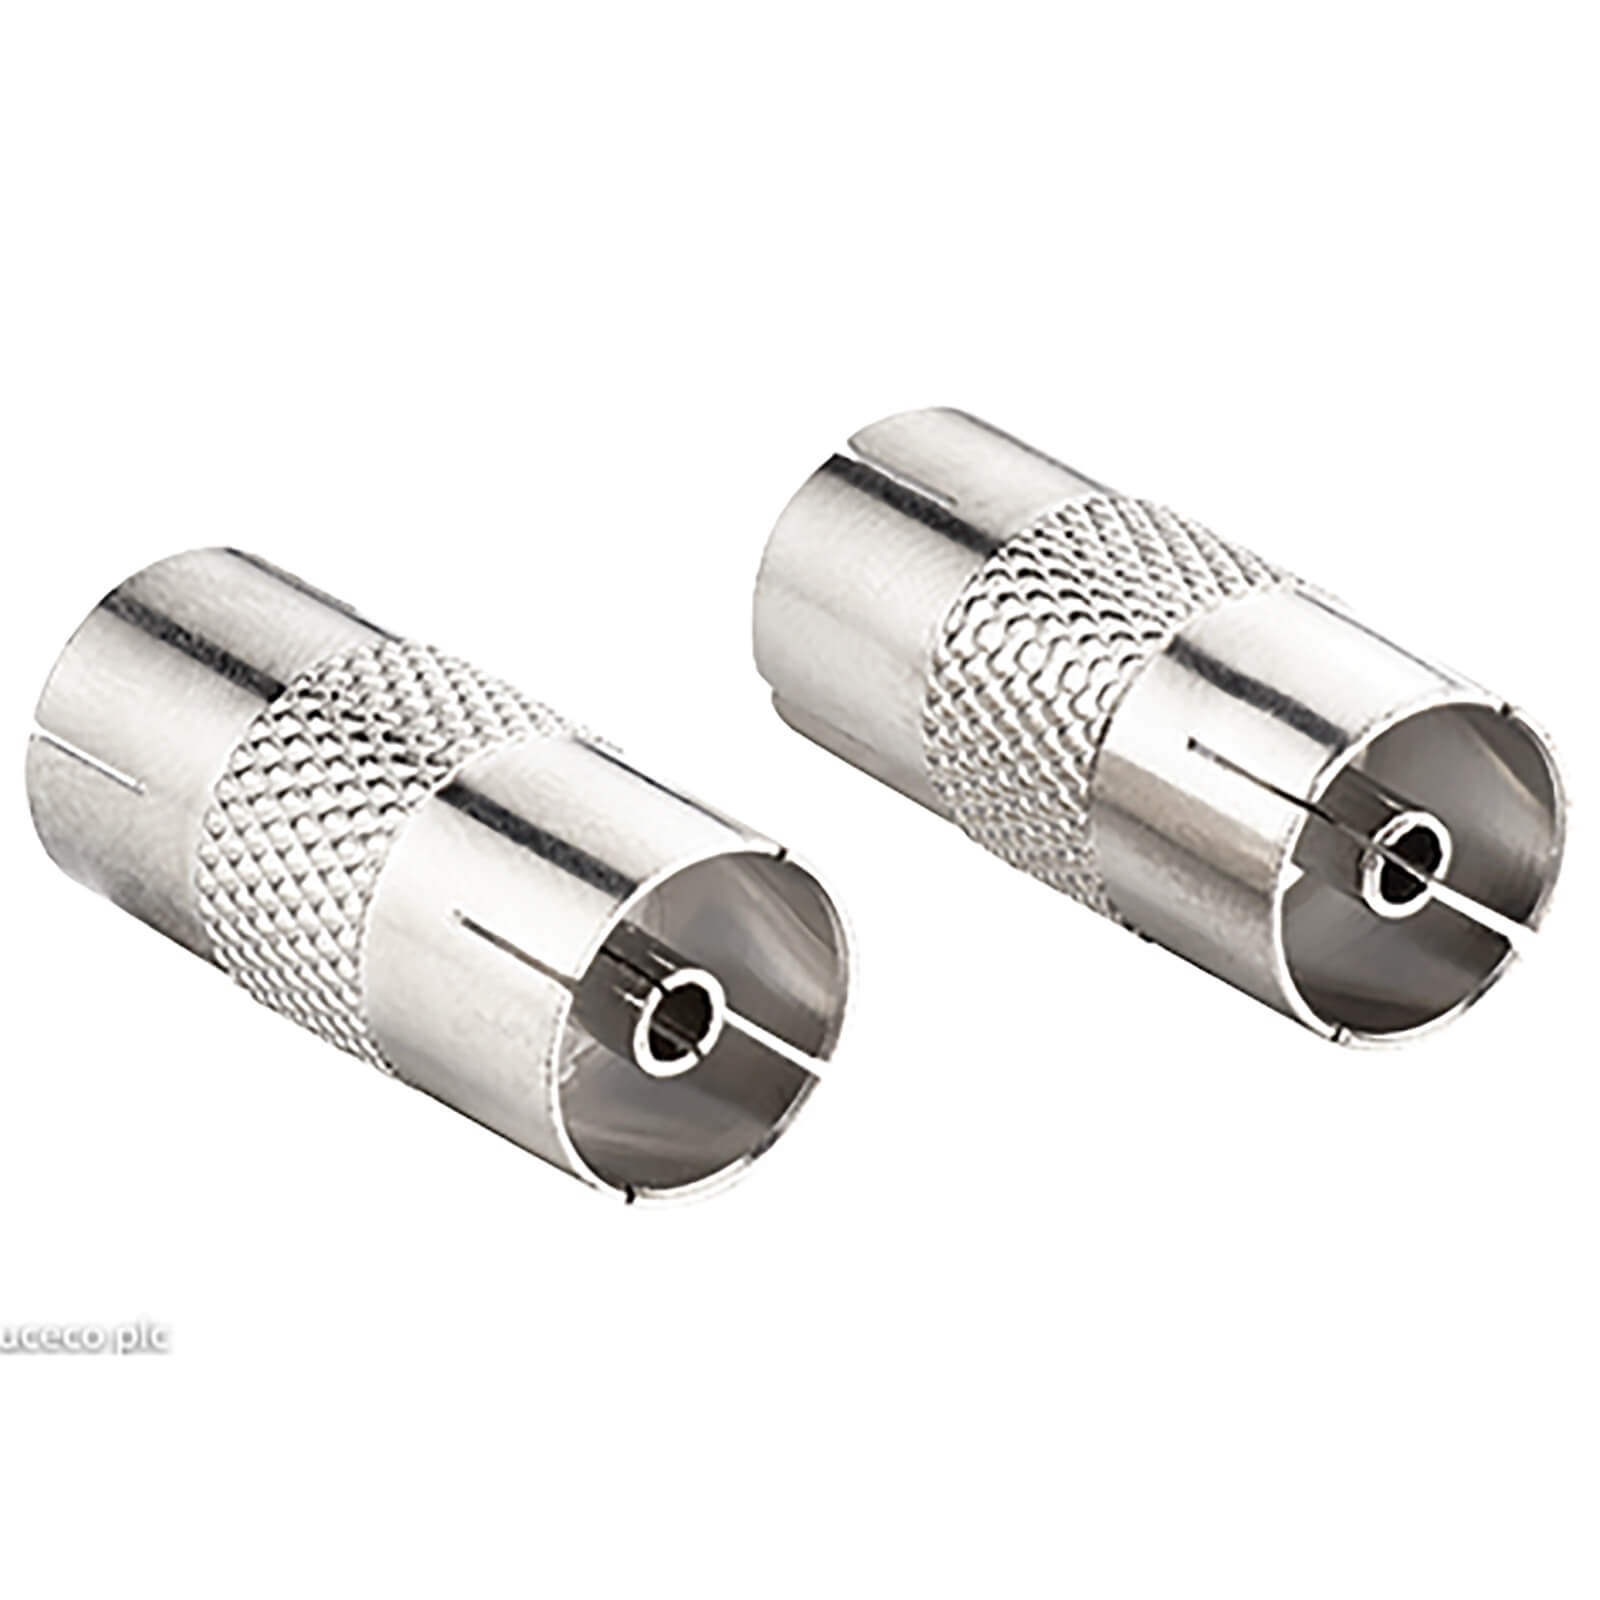 Photo of Ross Coaxial Aerial Cable Couplers Nickel 2 Pack